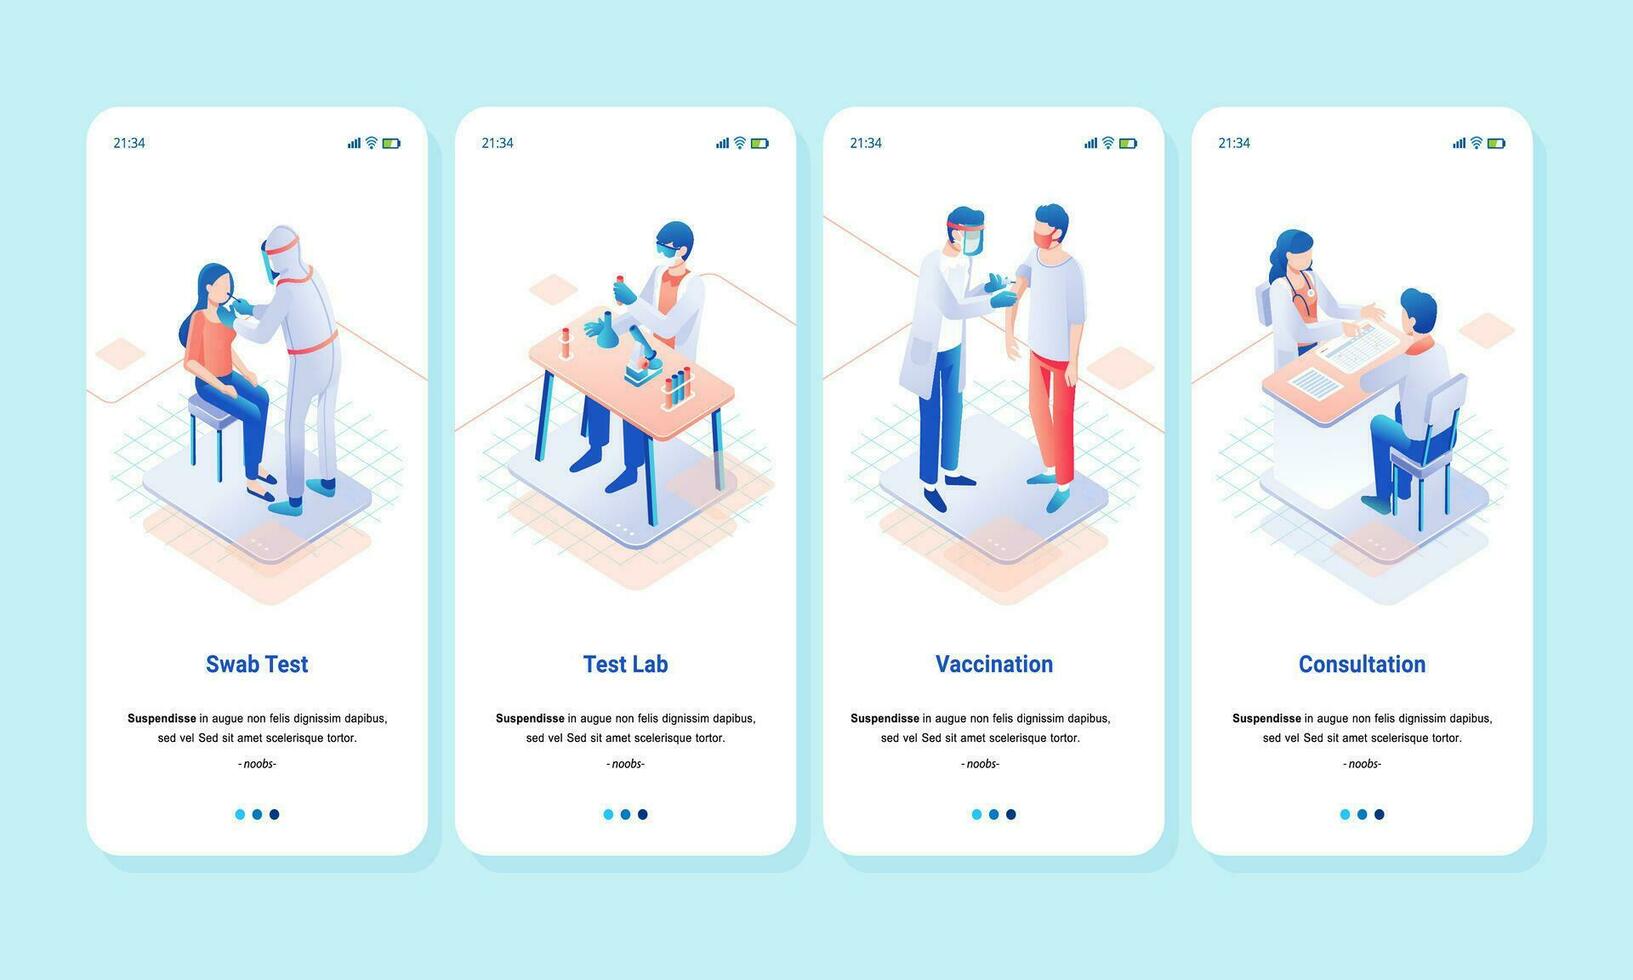 isometric landing page illustration for laboratory swab testing, vaccine administration and testing and health consultations vector